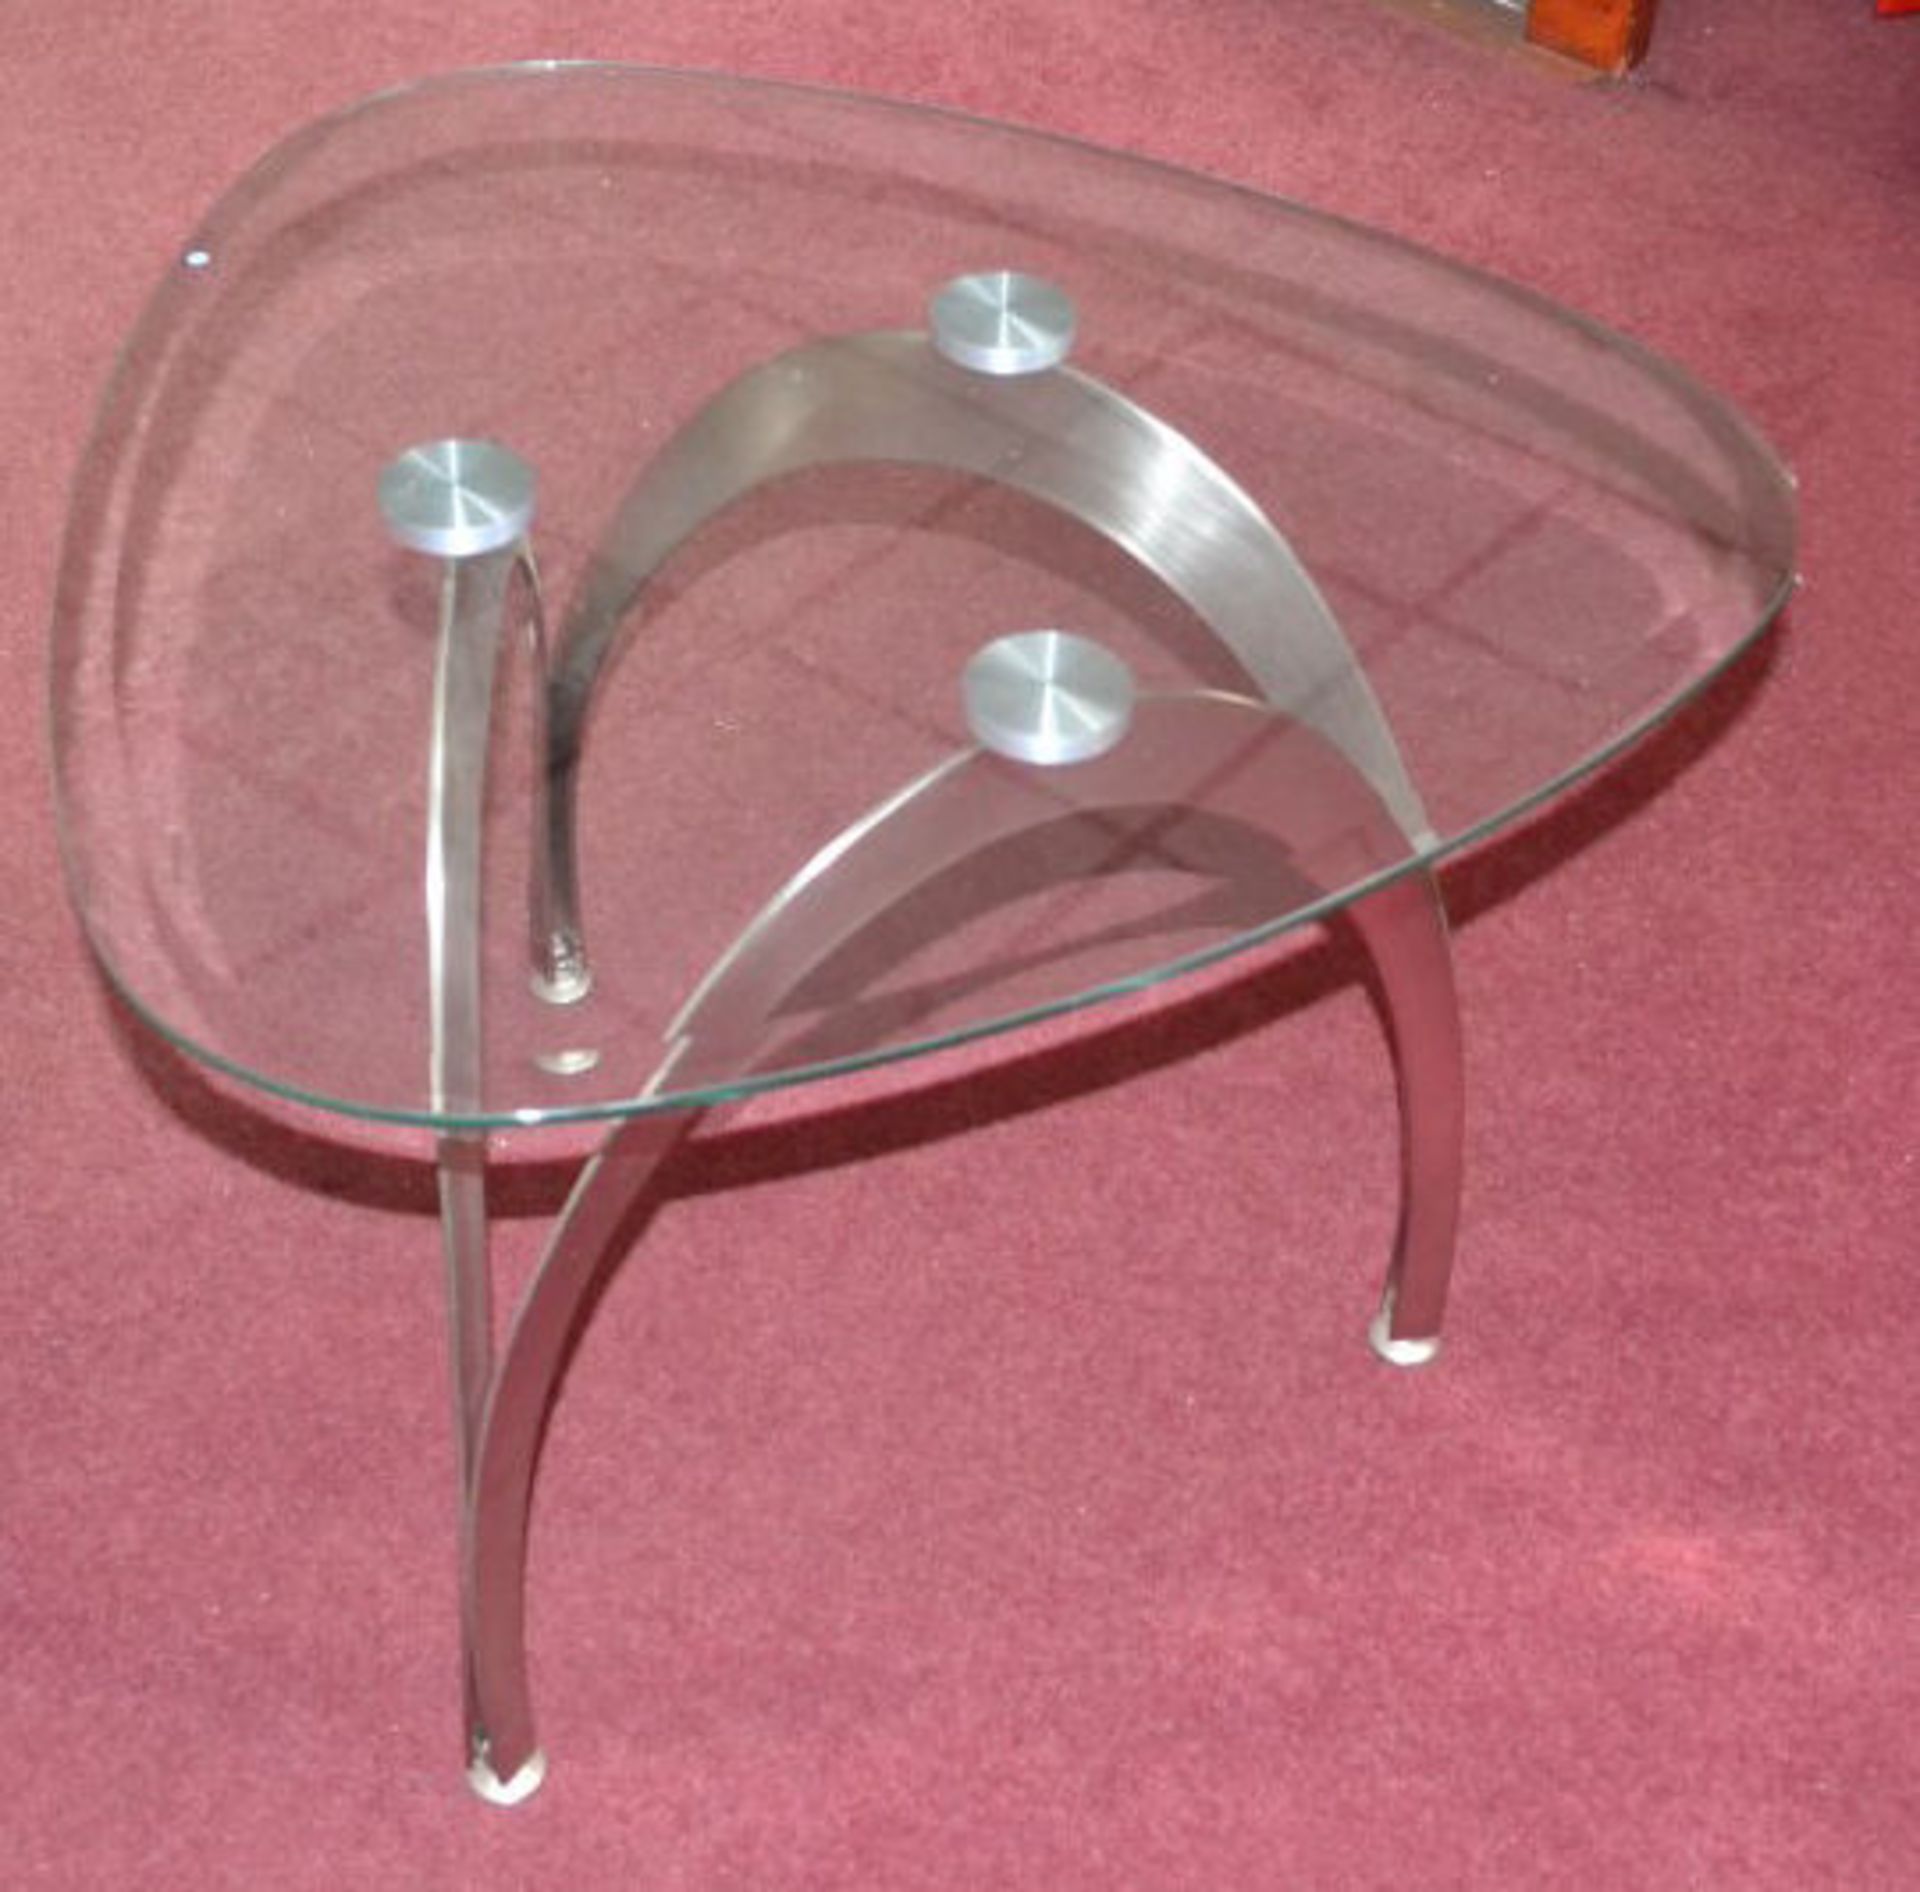 1 x Contemporary Triangular Glass Side Table with Satin Nickel Legs - Image 4 of 4